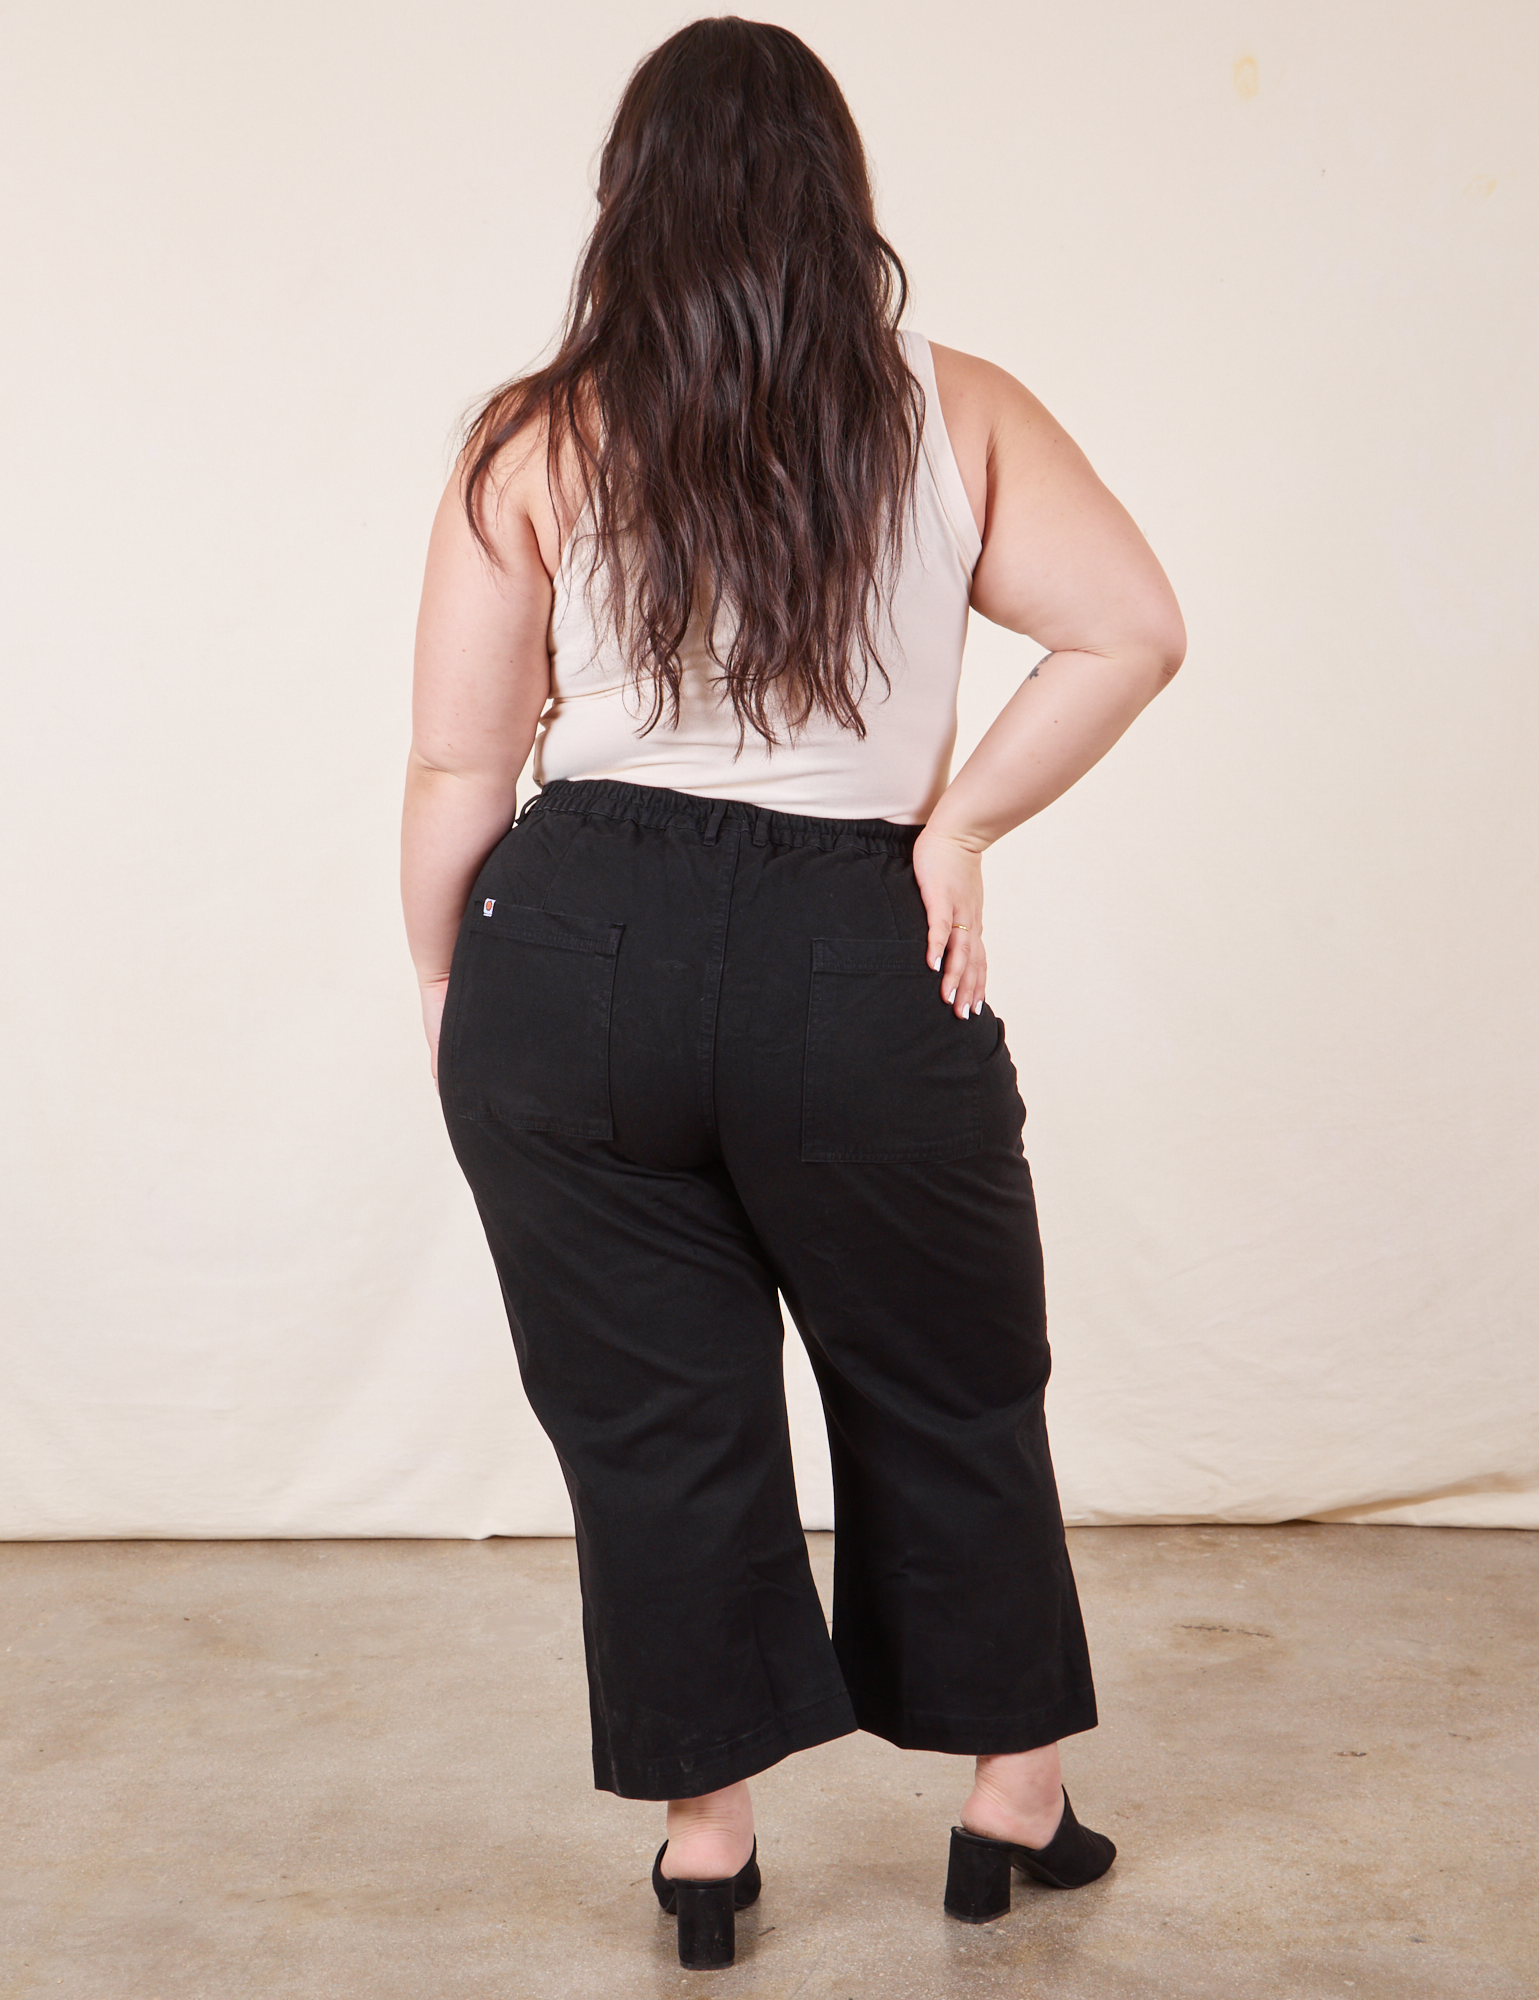 Western Pants in Basic Black back view on Ashley wearing Tank Top in vintage tee off-white